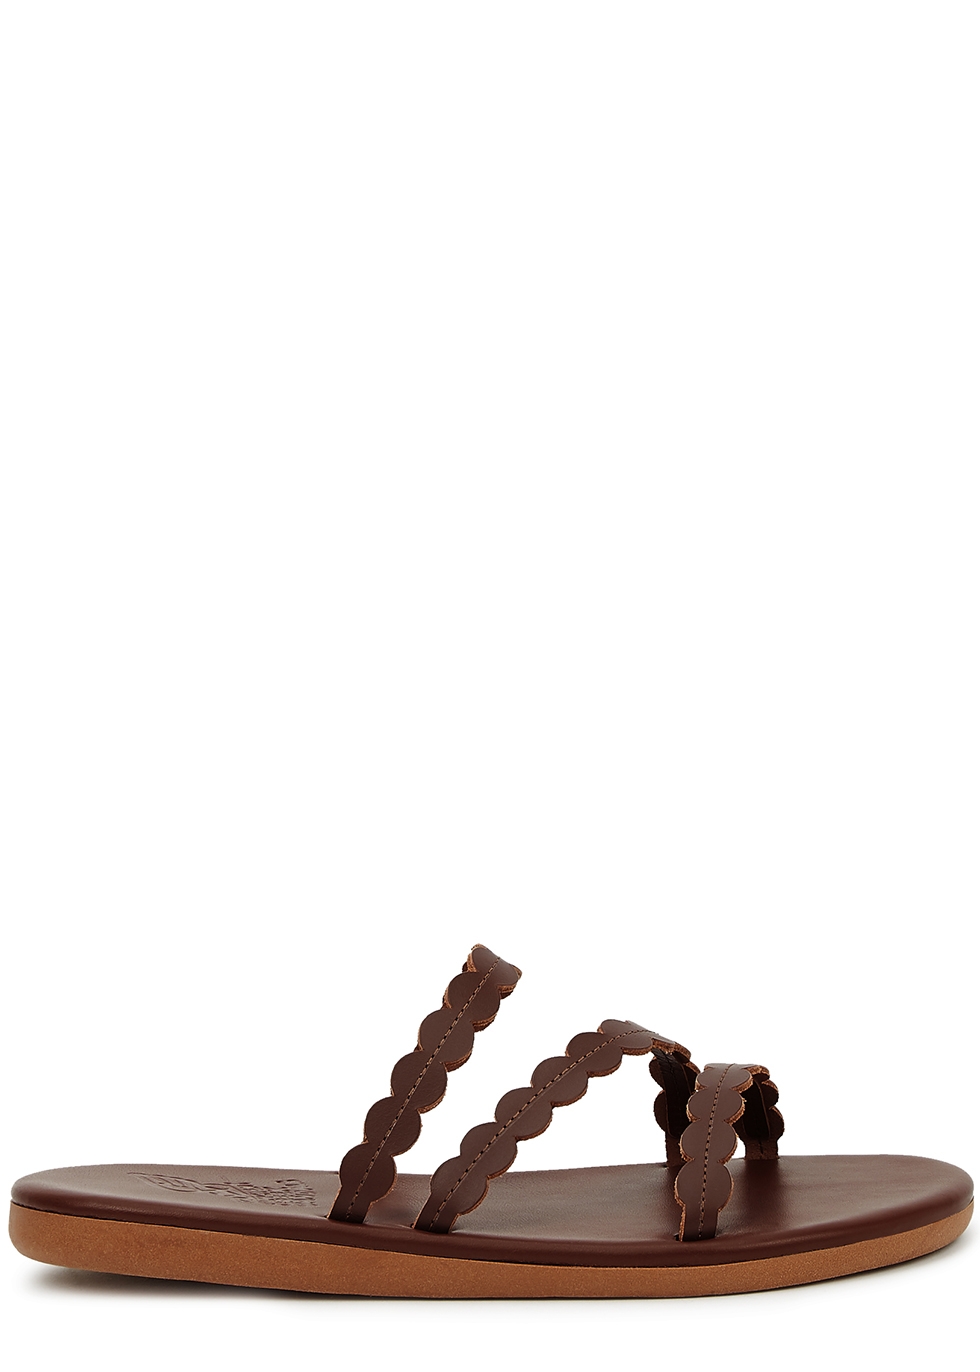 ANCIENT GREEK SANDALS OCEANIS BROWN SCALLOPED LEATHER SANDALS